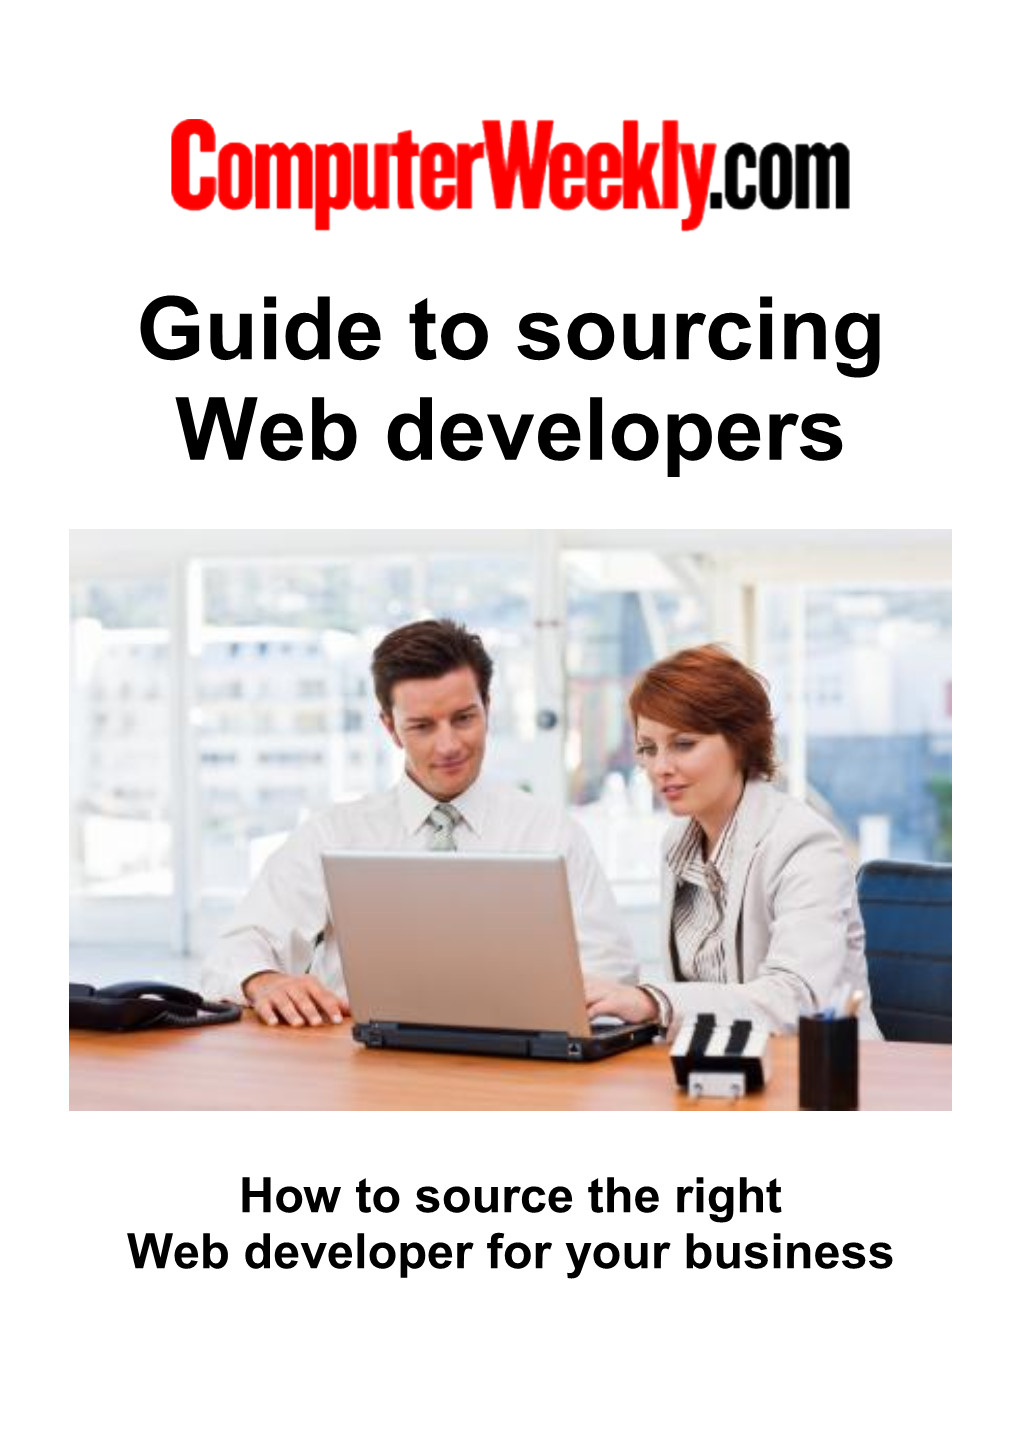 Guide to Sourcing Web Developers